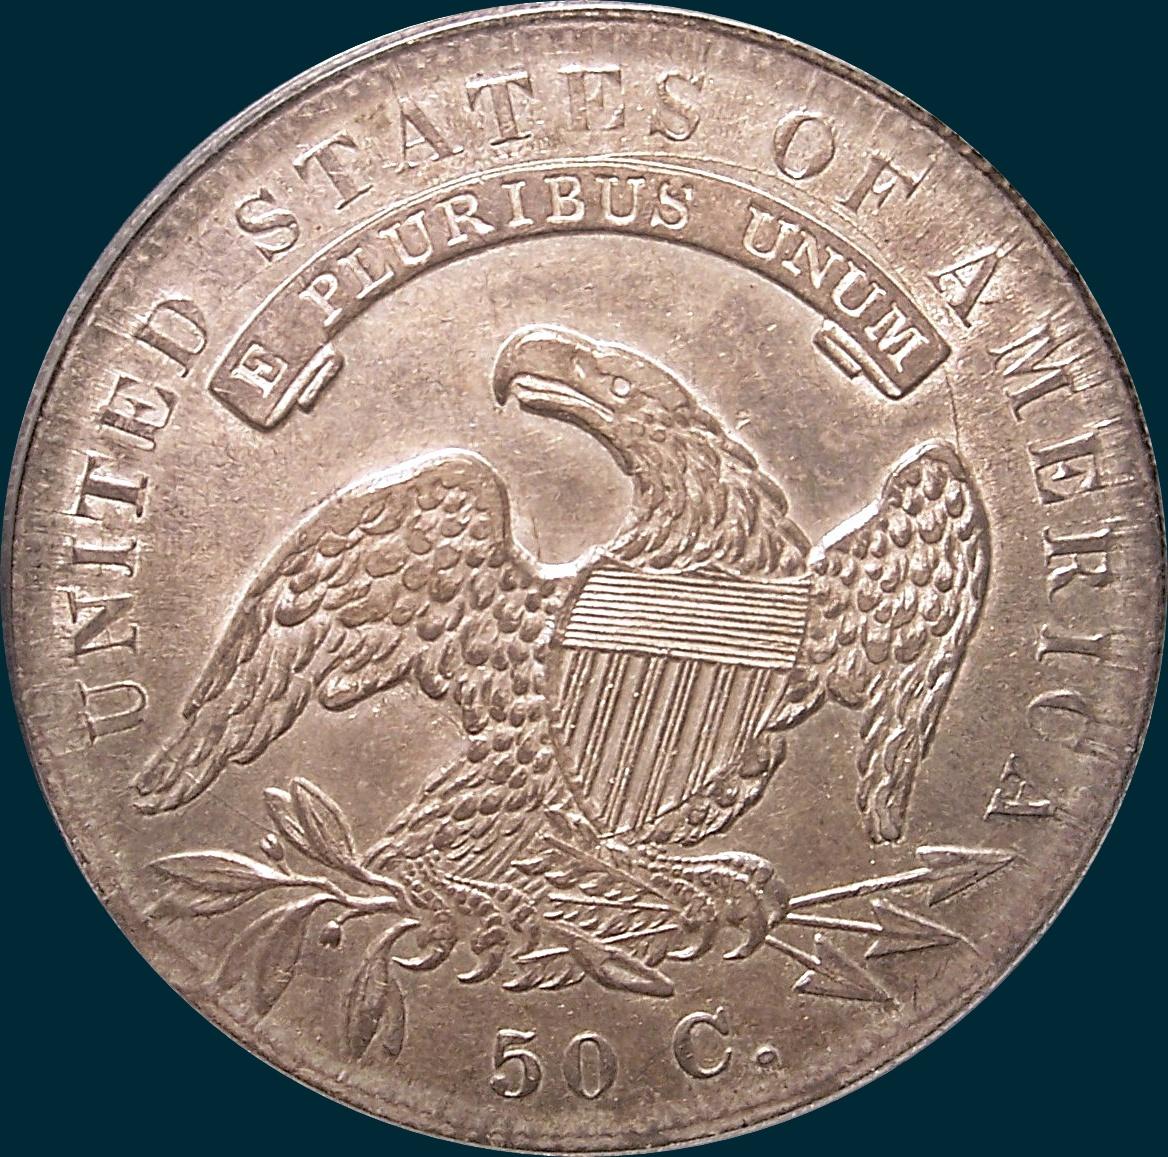 1834, O-110, Small Date, Small Letters, Capped Bust, Half Dollar